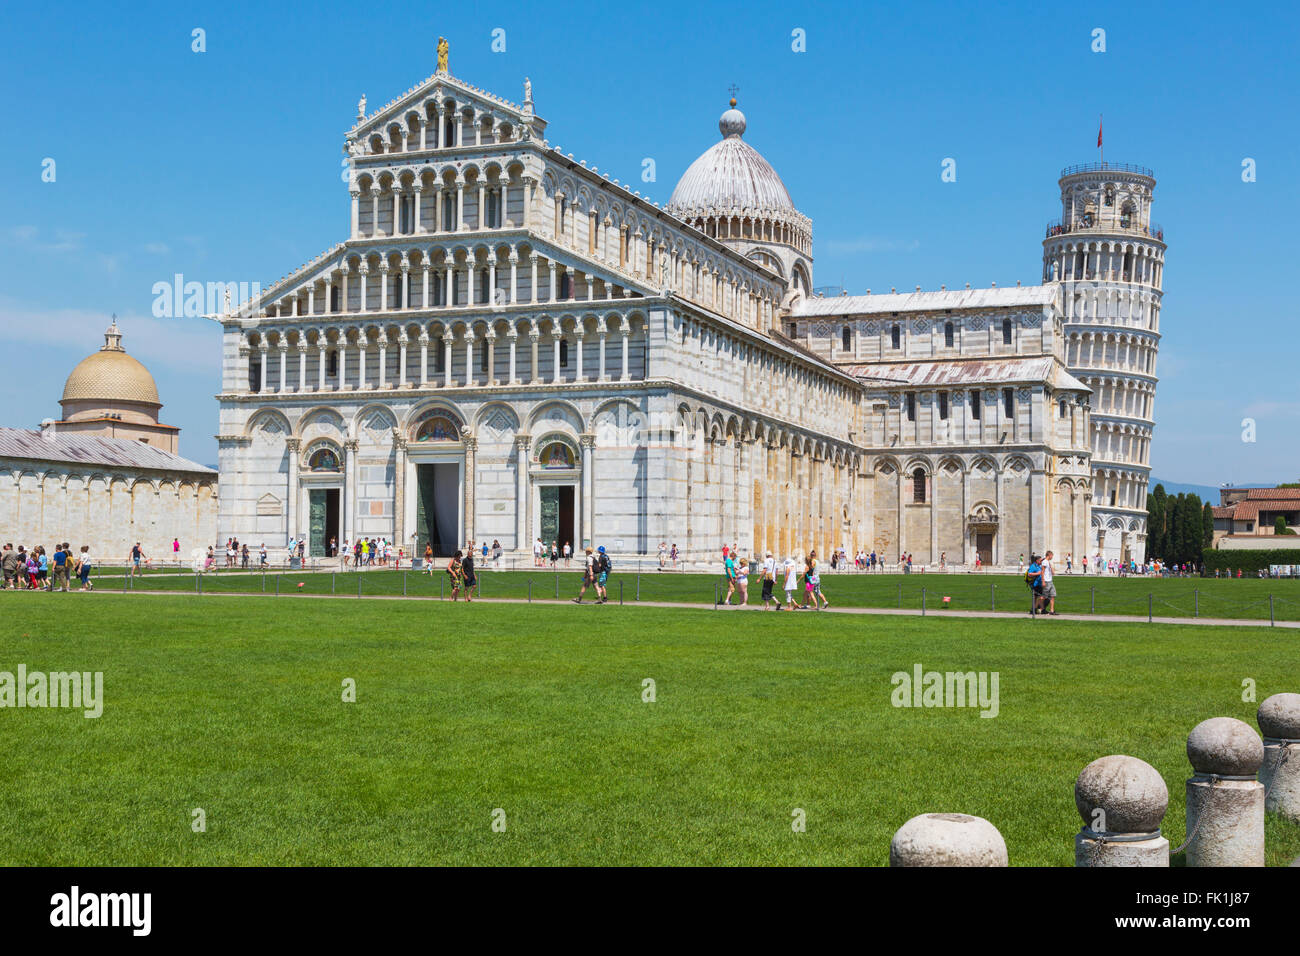 Pisa, Pisa Province, Tuscany, Italy.  Campo dei Miracoli, or Field of Miracles.  Also known as the Piazza del Duomo. Stock Photo